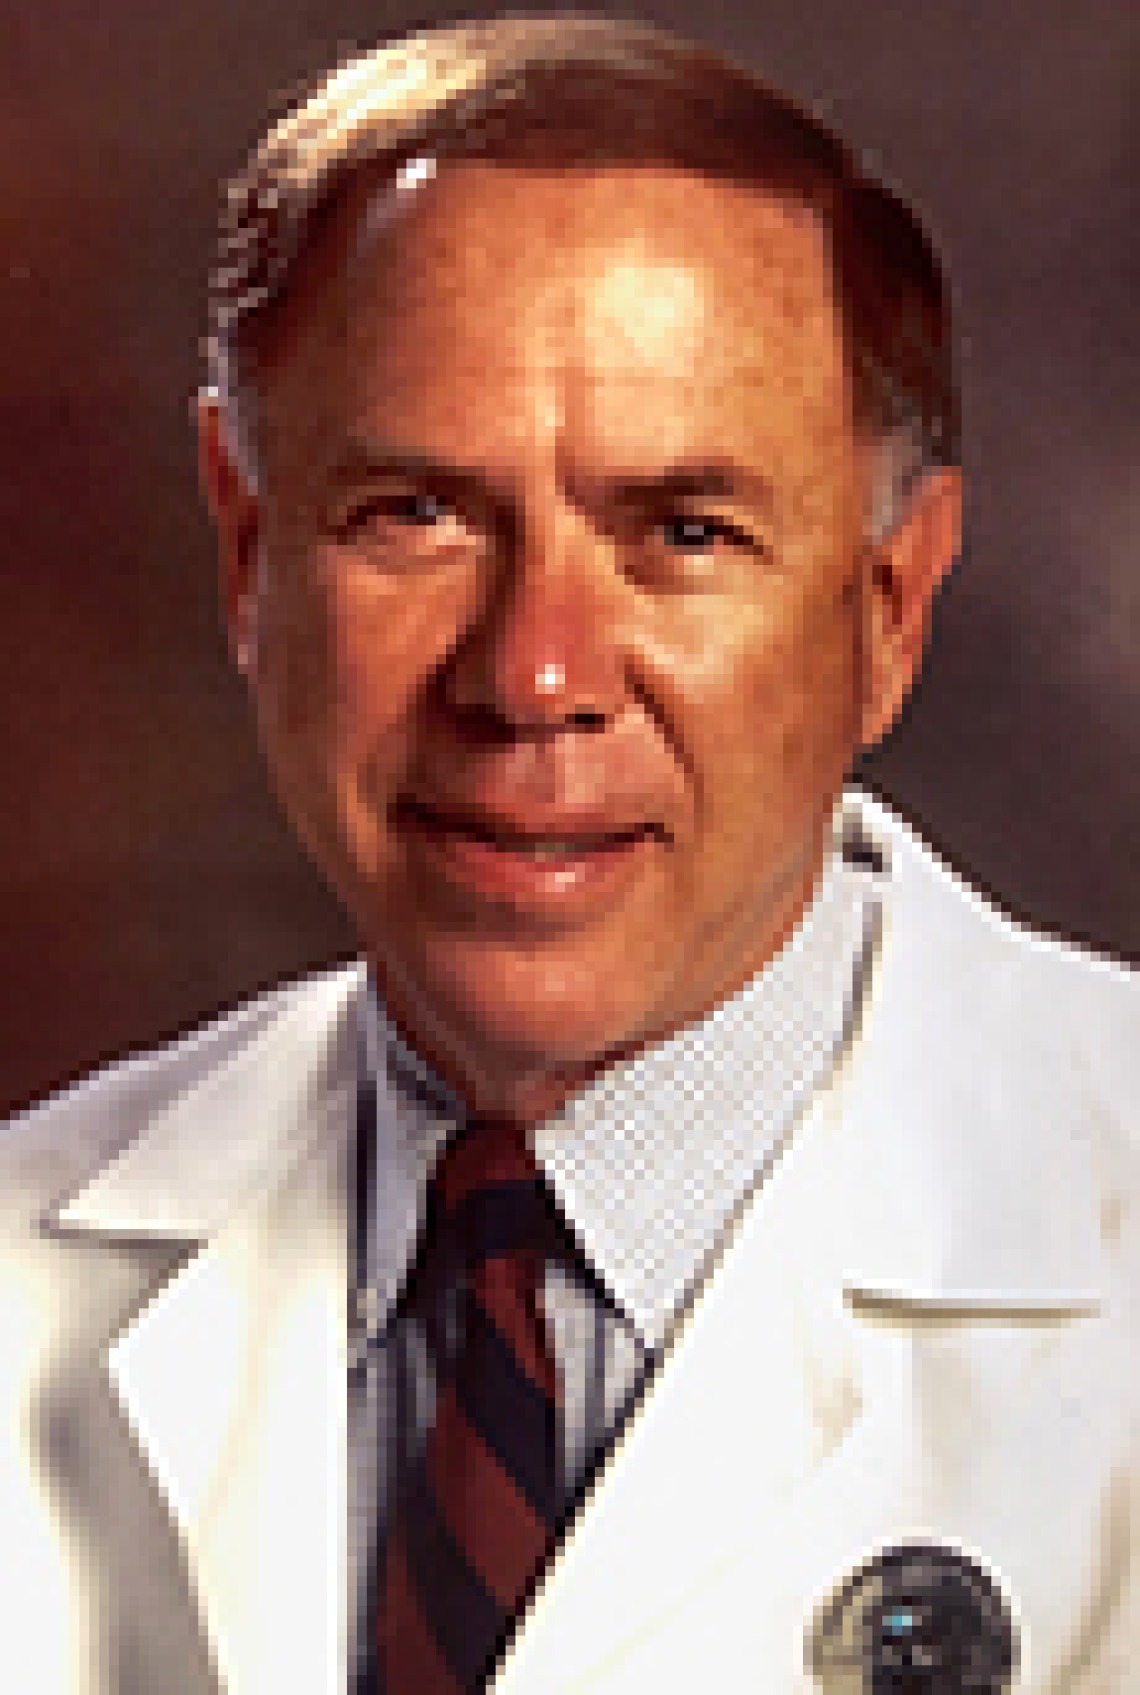 Robert G. Volz, MD, orthopedic surgeon and medical device inventor